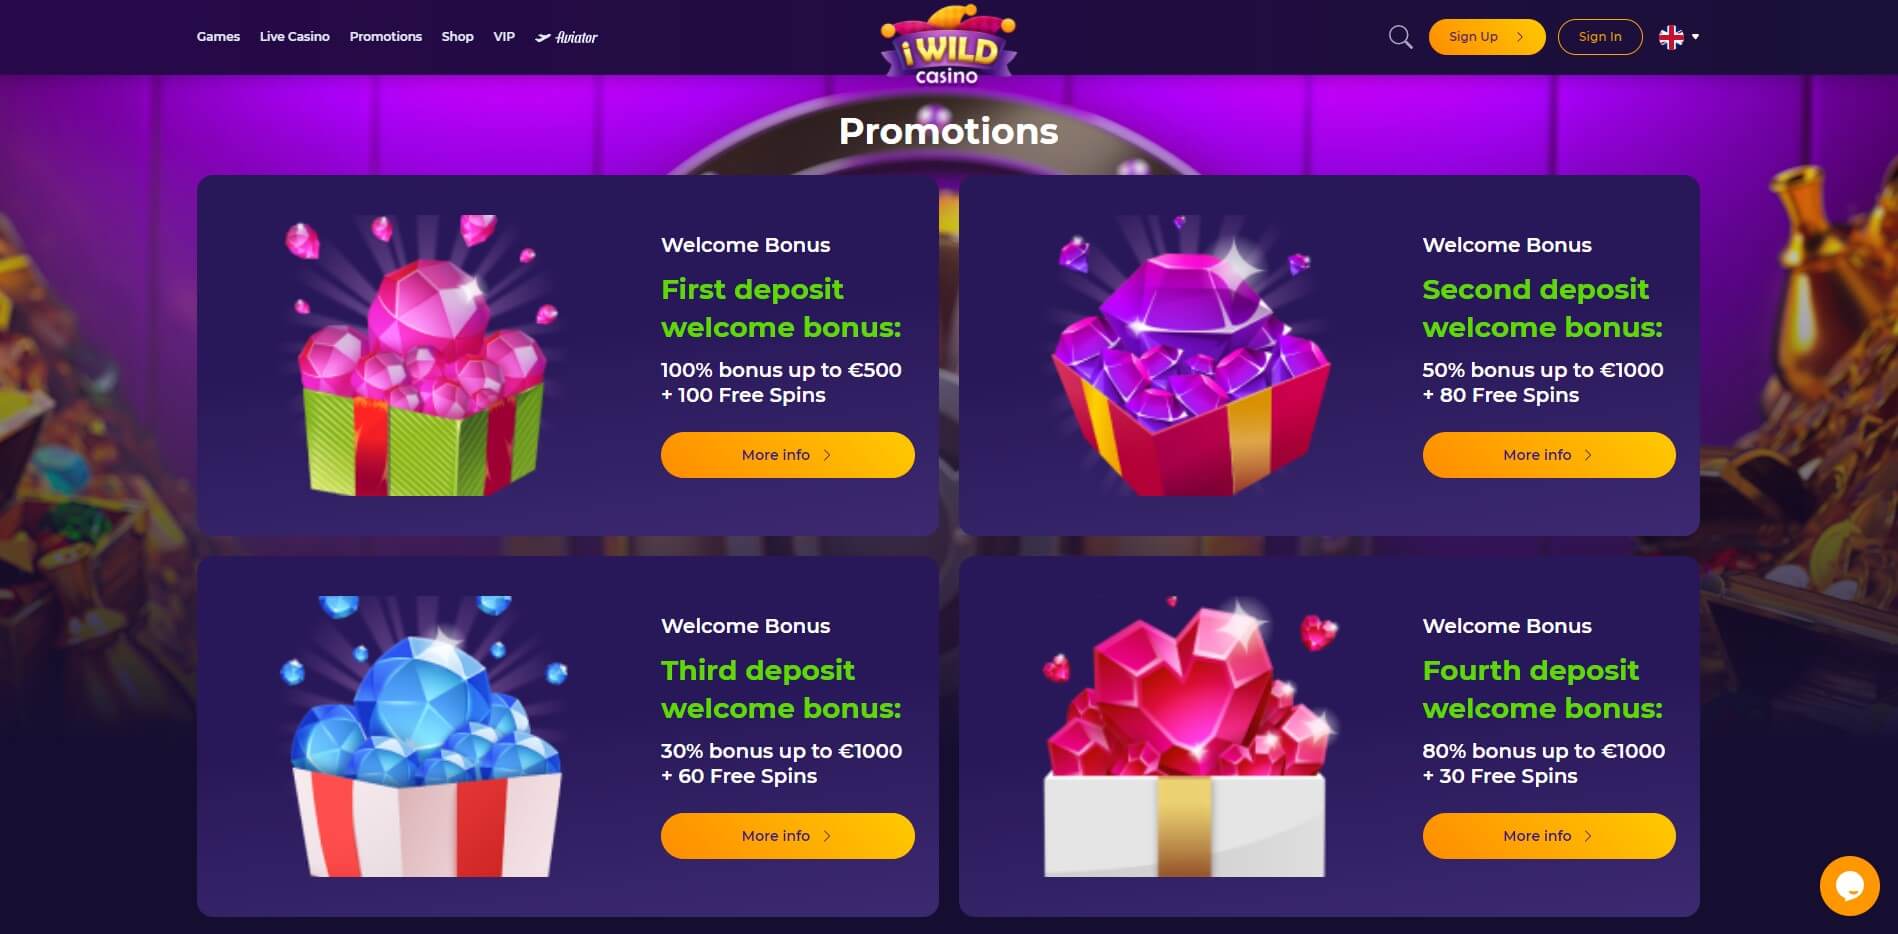 Promotions at iWild Casino